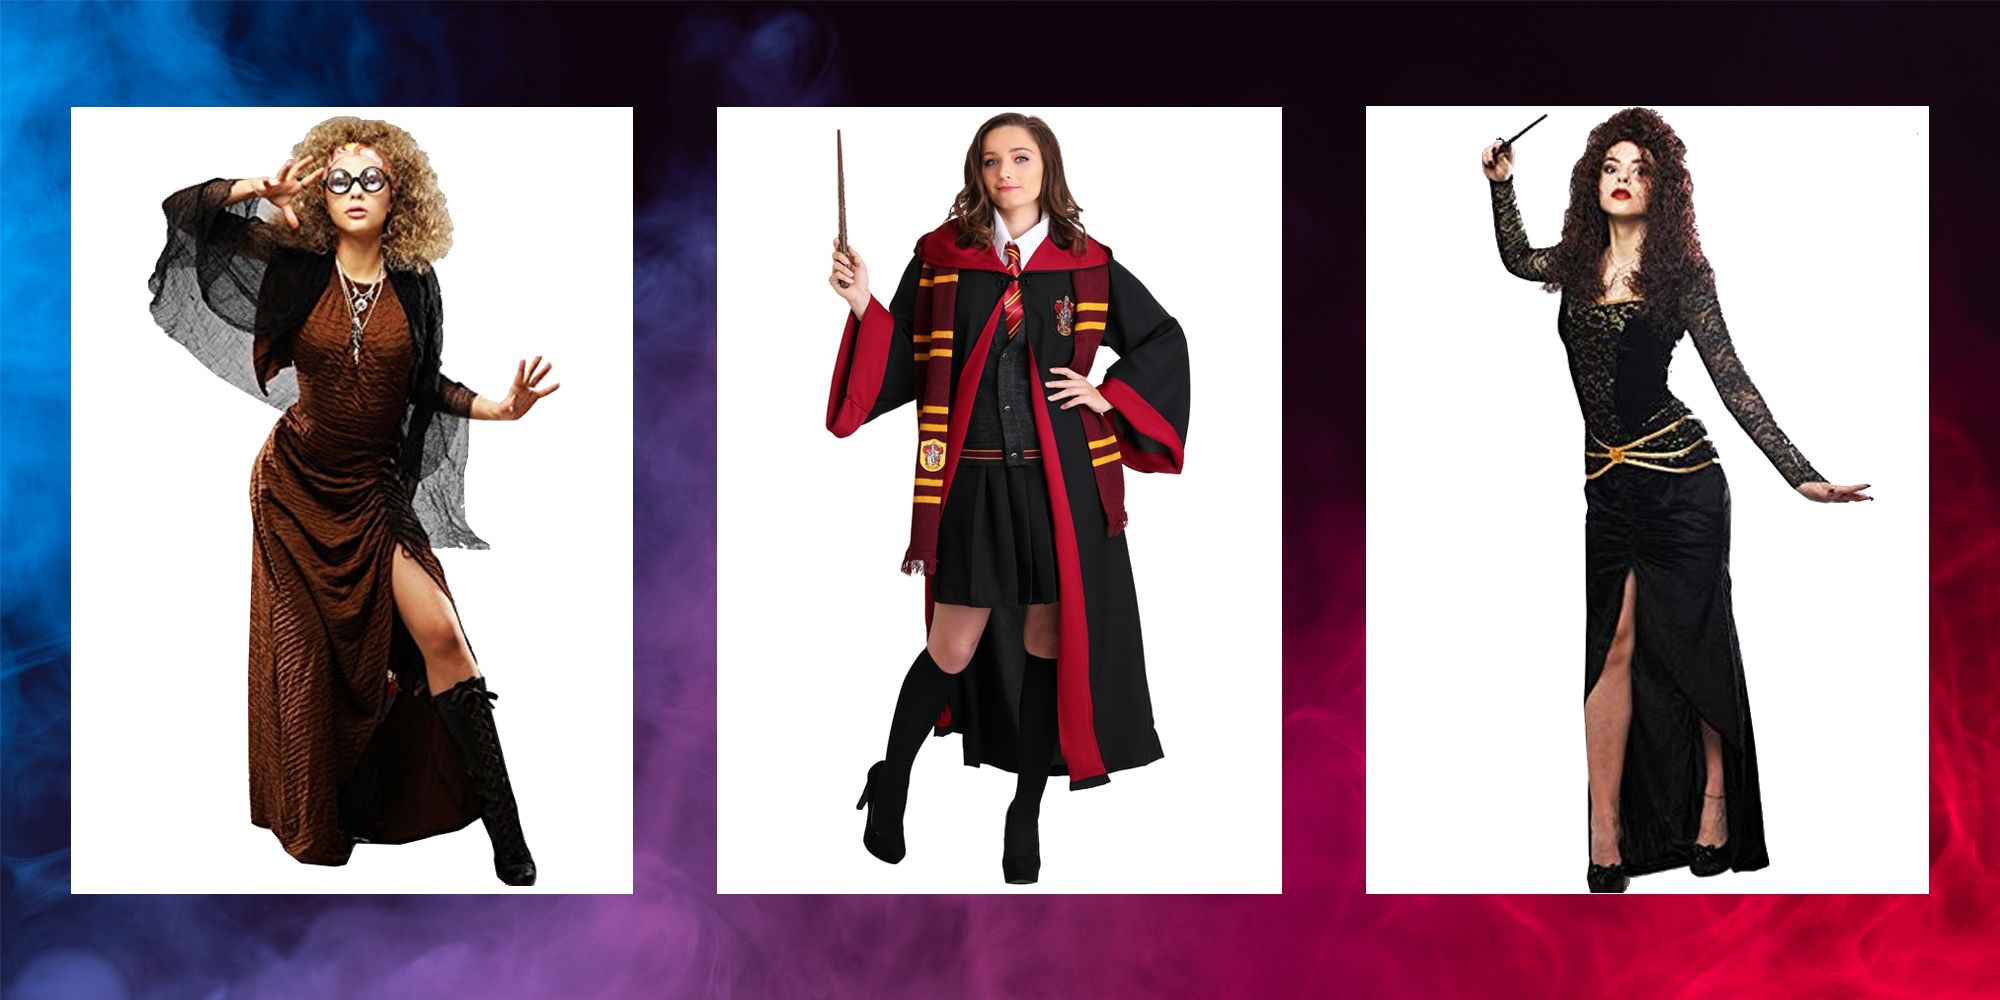 Harry Potter': Unique and Cool Things About Costumes